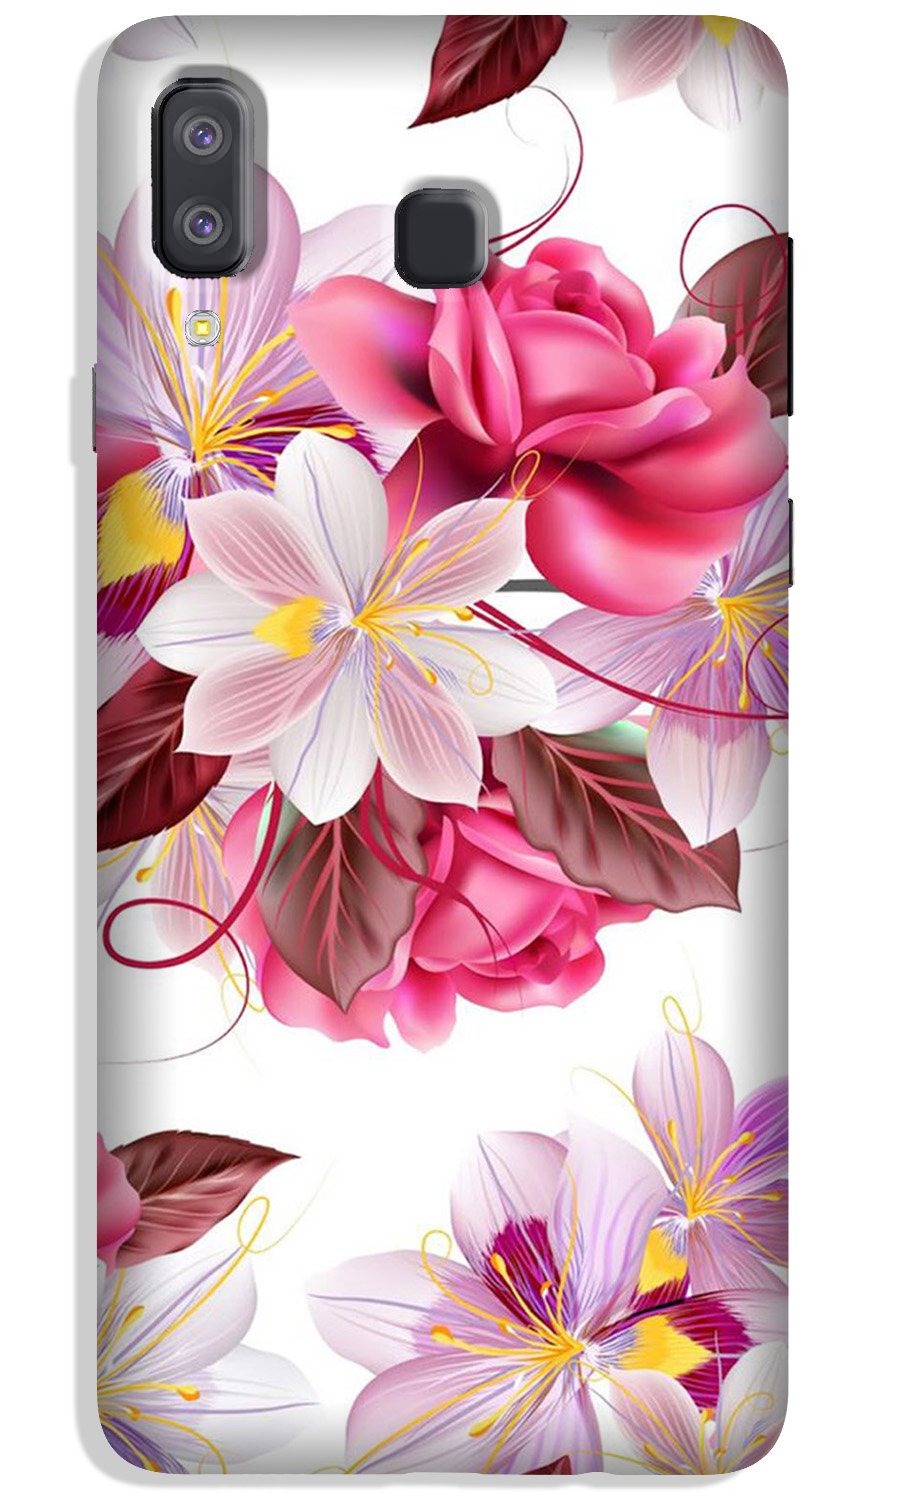 Beautiful flowers Case for Galaxy A8 Star